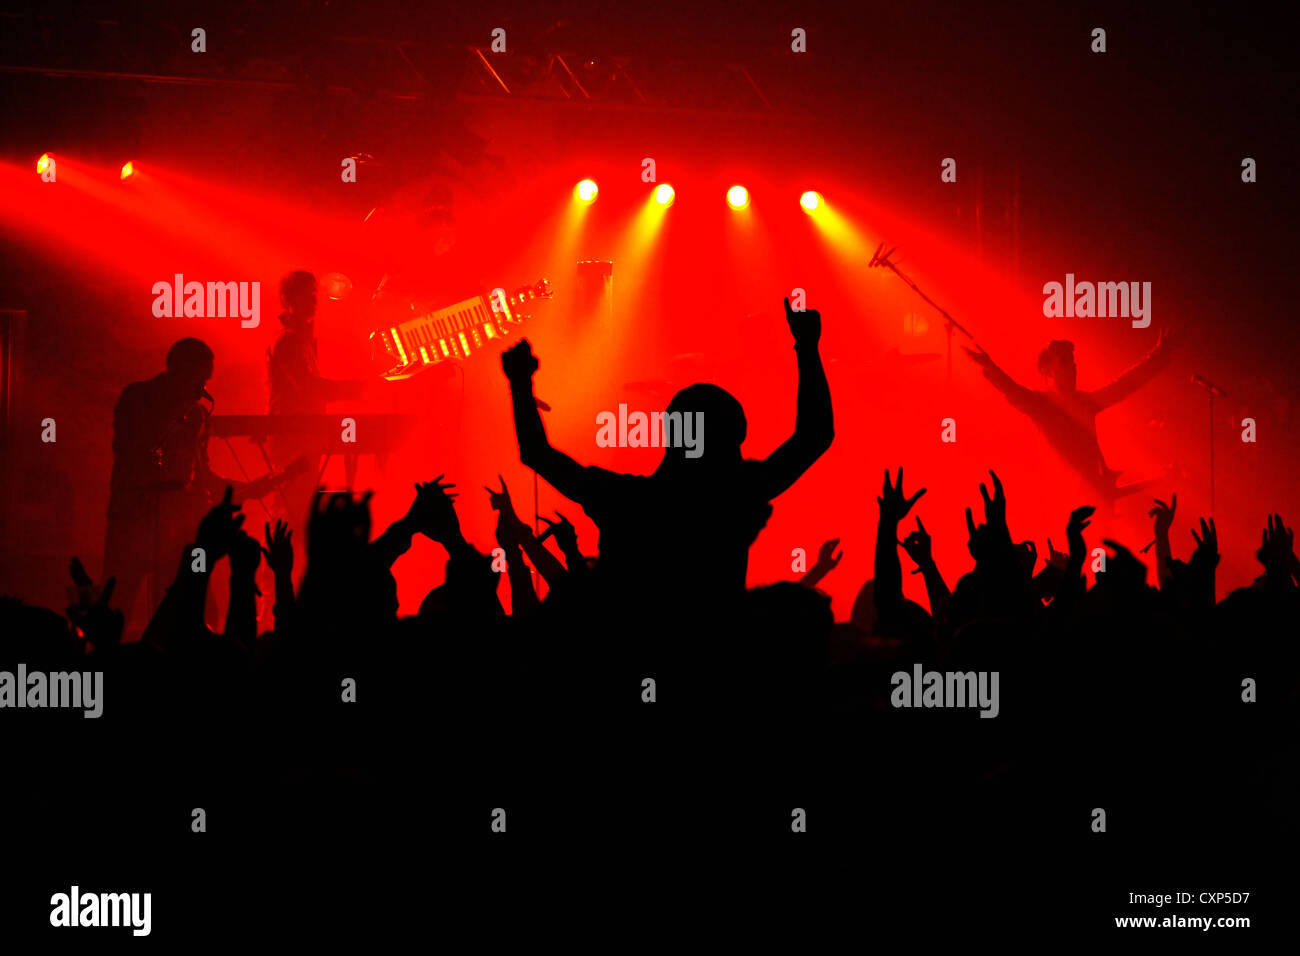 Silhouetted spectators / crowd and ambiance during live rock concert with rockers on stage illuminated by red spotlights Stock Photo